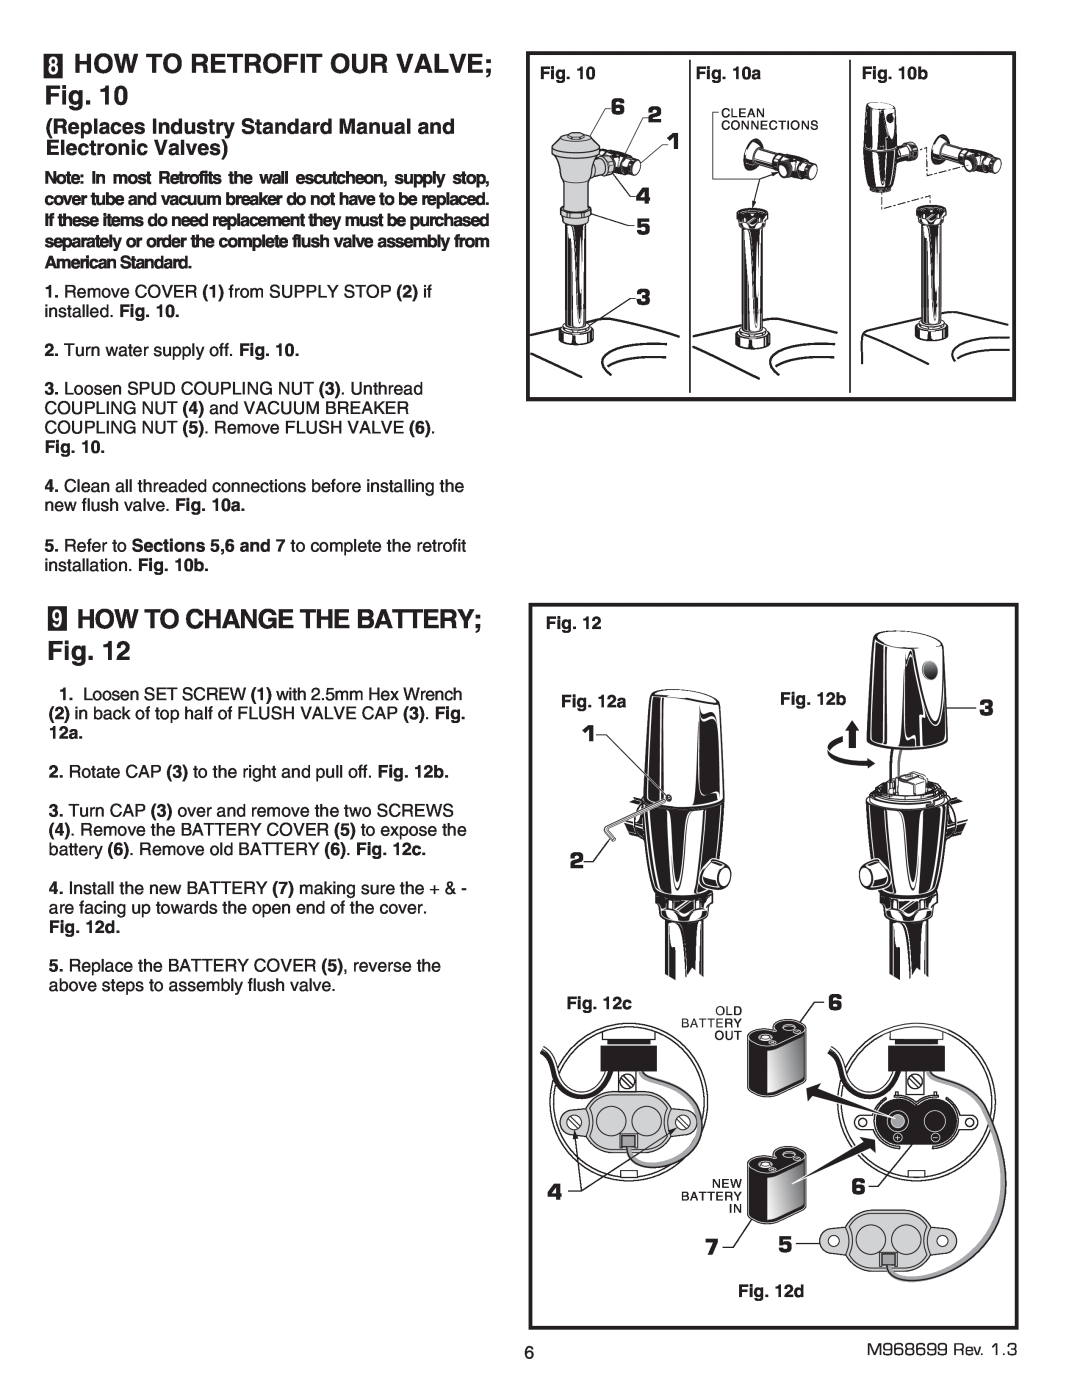 American Standard 6065.161, 065.525, 6065.565, 6065.121 8HOW TO RETROFIT OUR VALVE; Fig, 9HOW TO CHANGE THE BATTERY Fig 